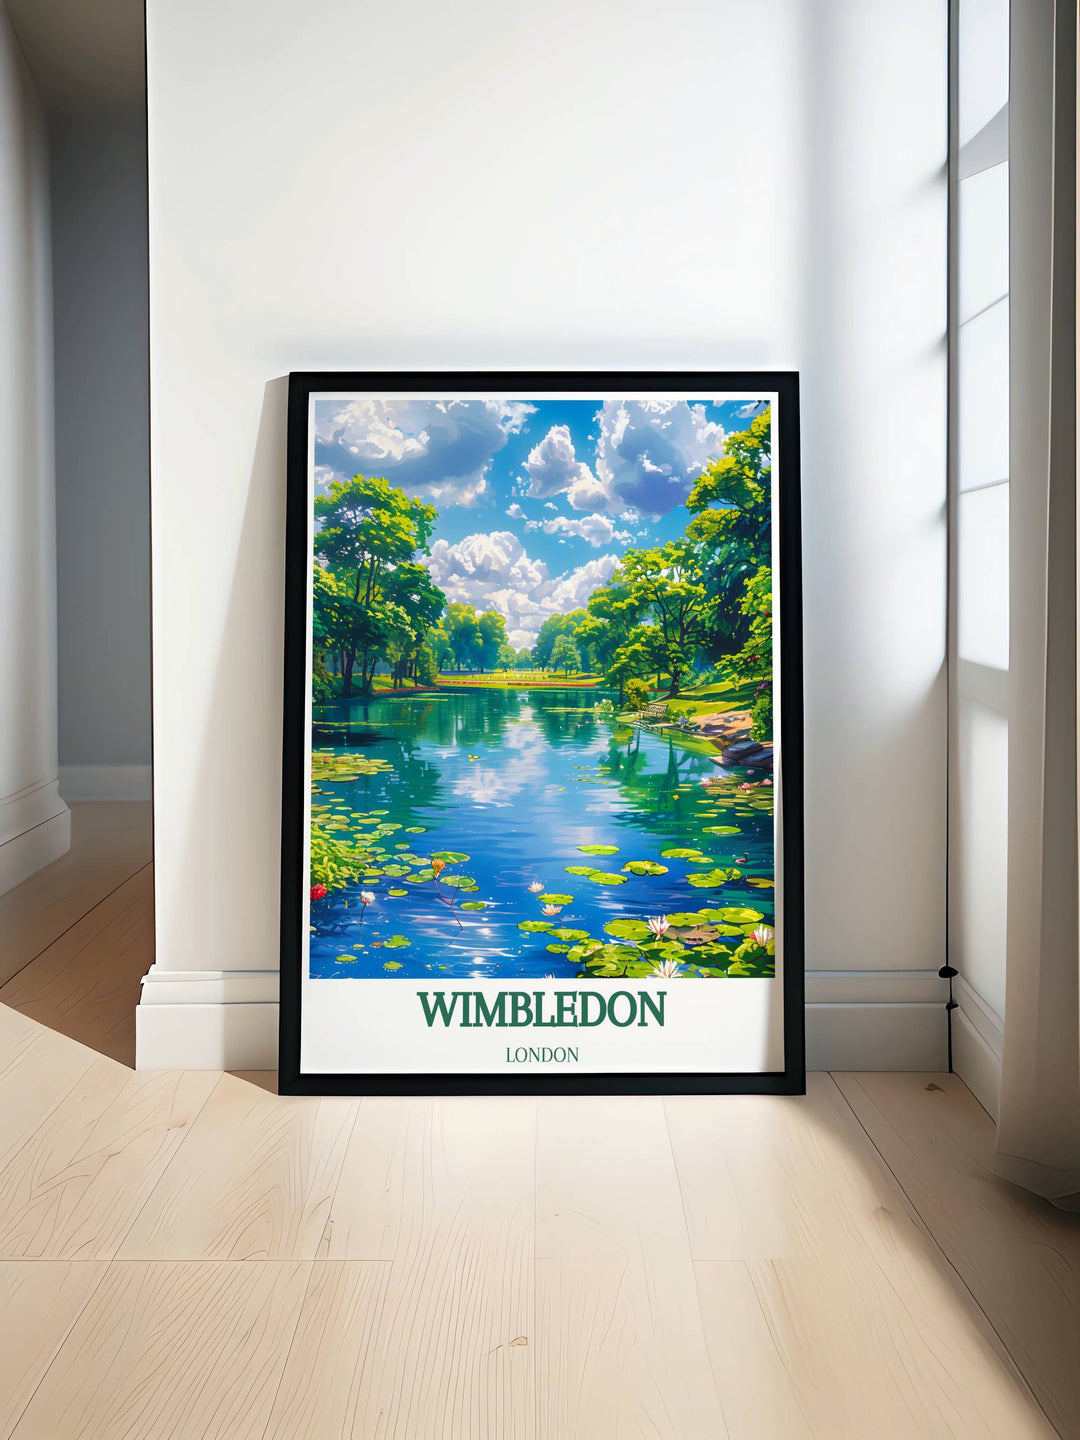 Wimbledon Common travel poster showing the lush greenery and serene paths, capturing the tranquil beauty of this iconic London location in vibrant detail.